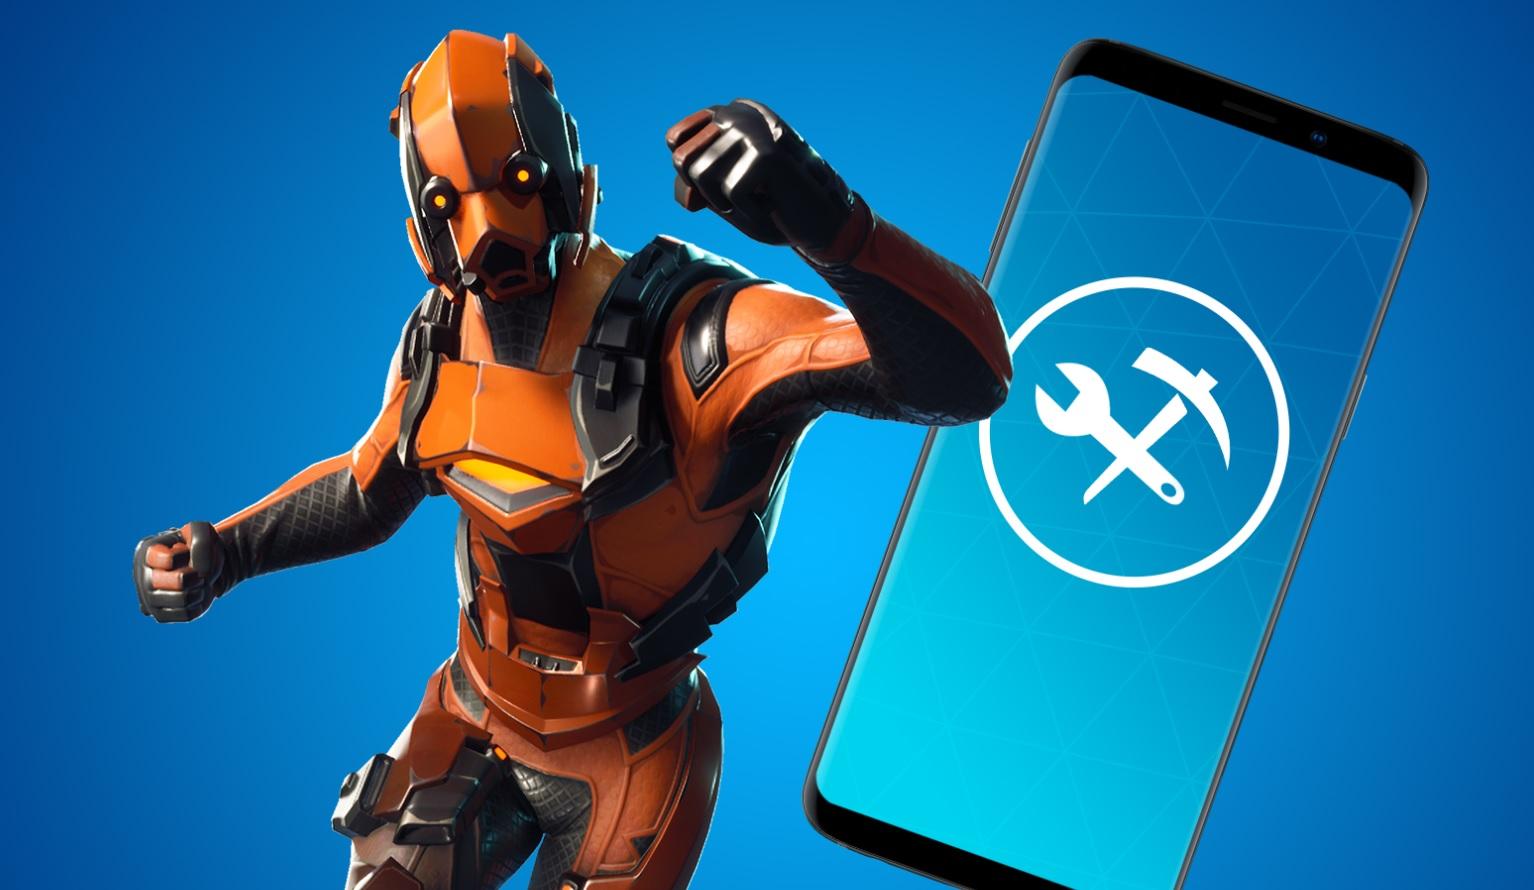 Fake versions of the Fortnite Android app are riddled with malware, security researchers revealed